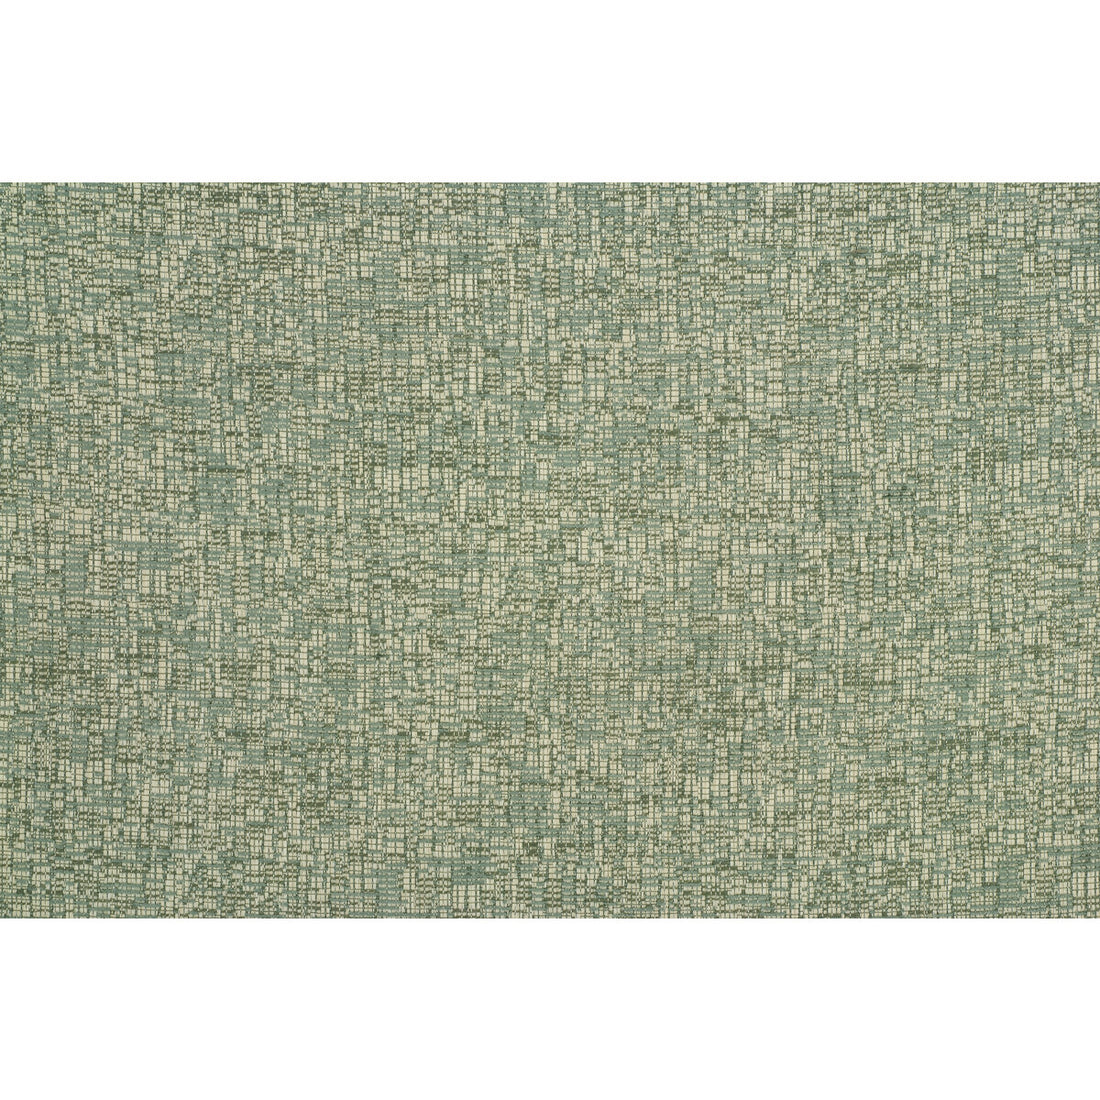 Kravet Contract fabric in 34737-13 color - pattern 34737.13.0 - by Kravet Contract in the Crypton Incase collection